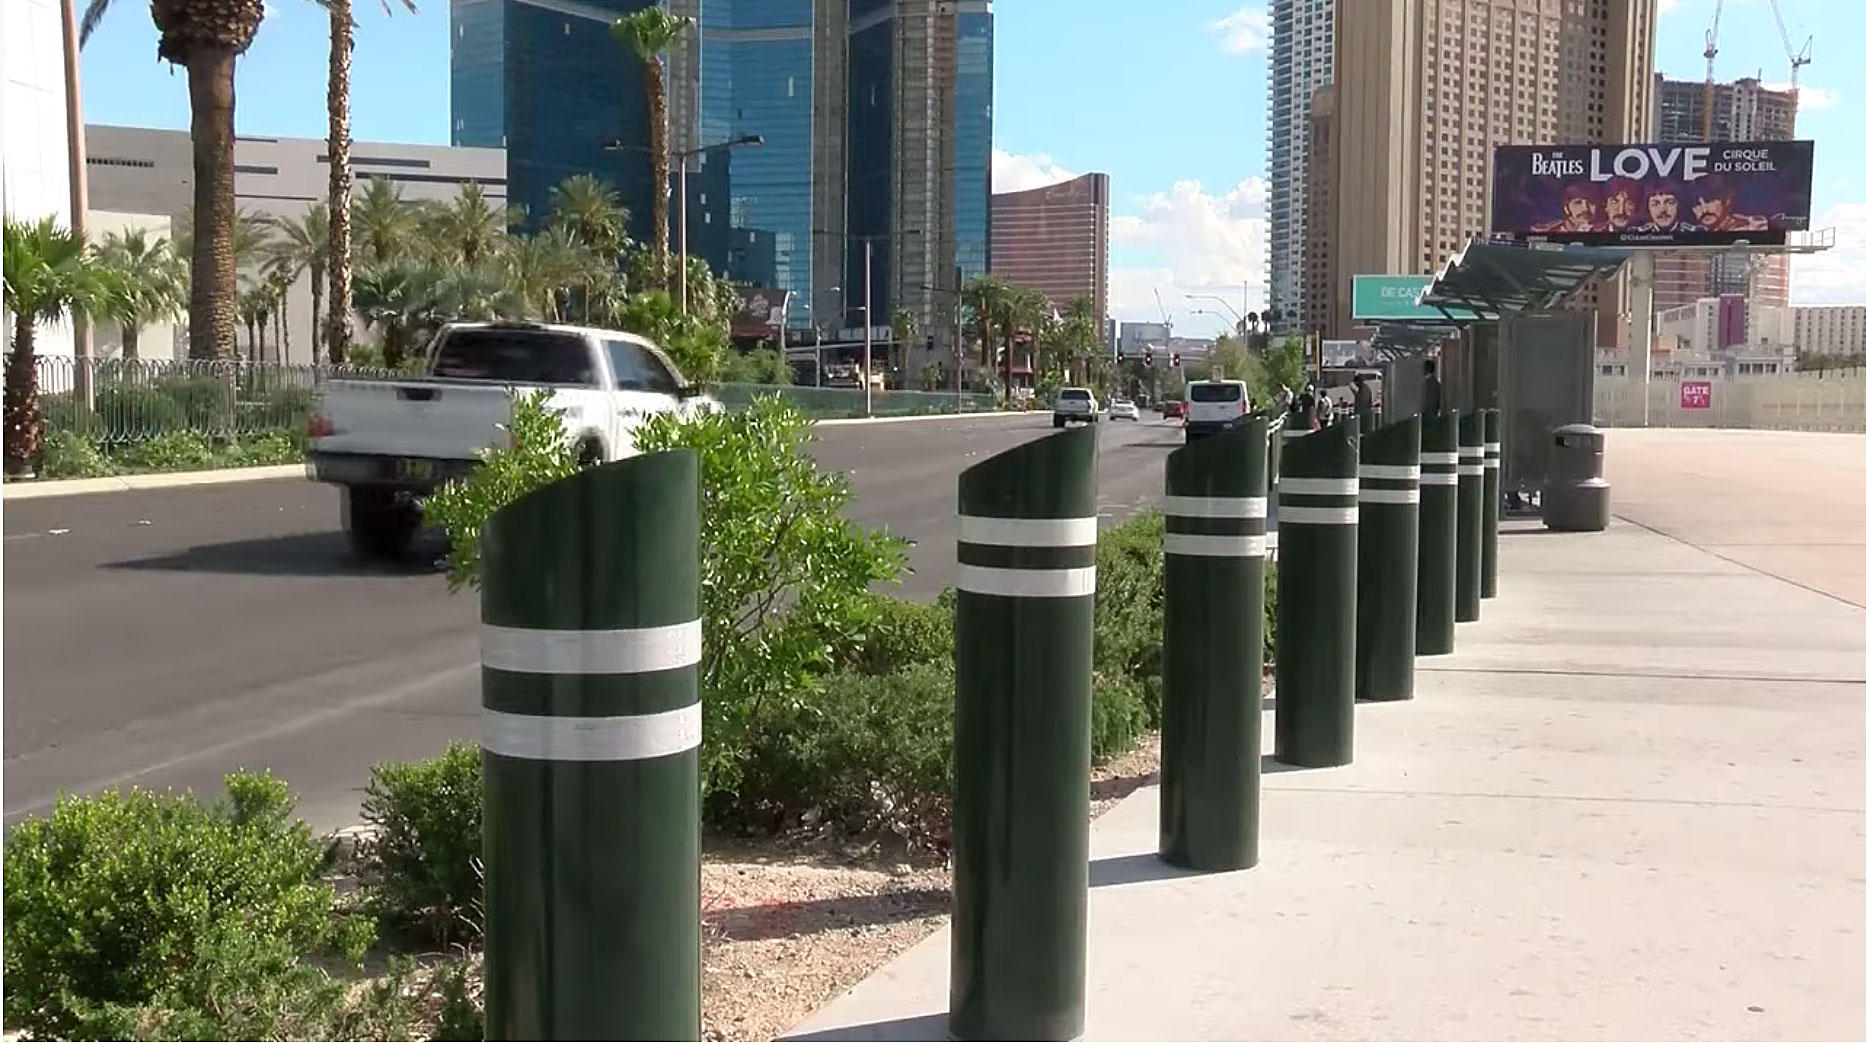 Anti-crash barriers for hostile vehicle mitigation (HVM) were installed along the Las Vegas Stip following a December 2015 incident when a 24 year old woman allegedly plowed her car into 37 people after driving along the sidewalk between the Paris Las Vegas and Planet Hollywood, which killed one woman. (Courtesy of YouTube)